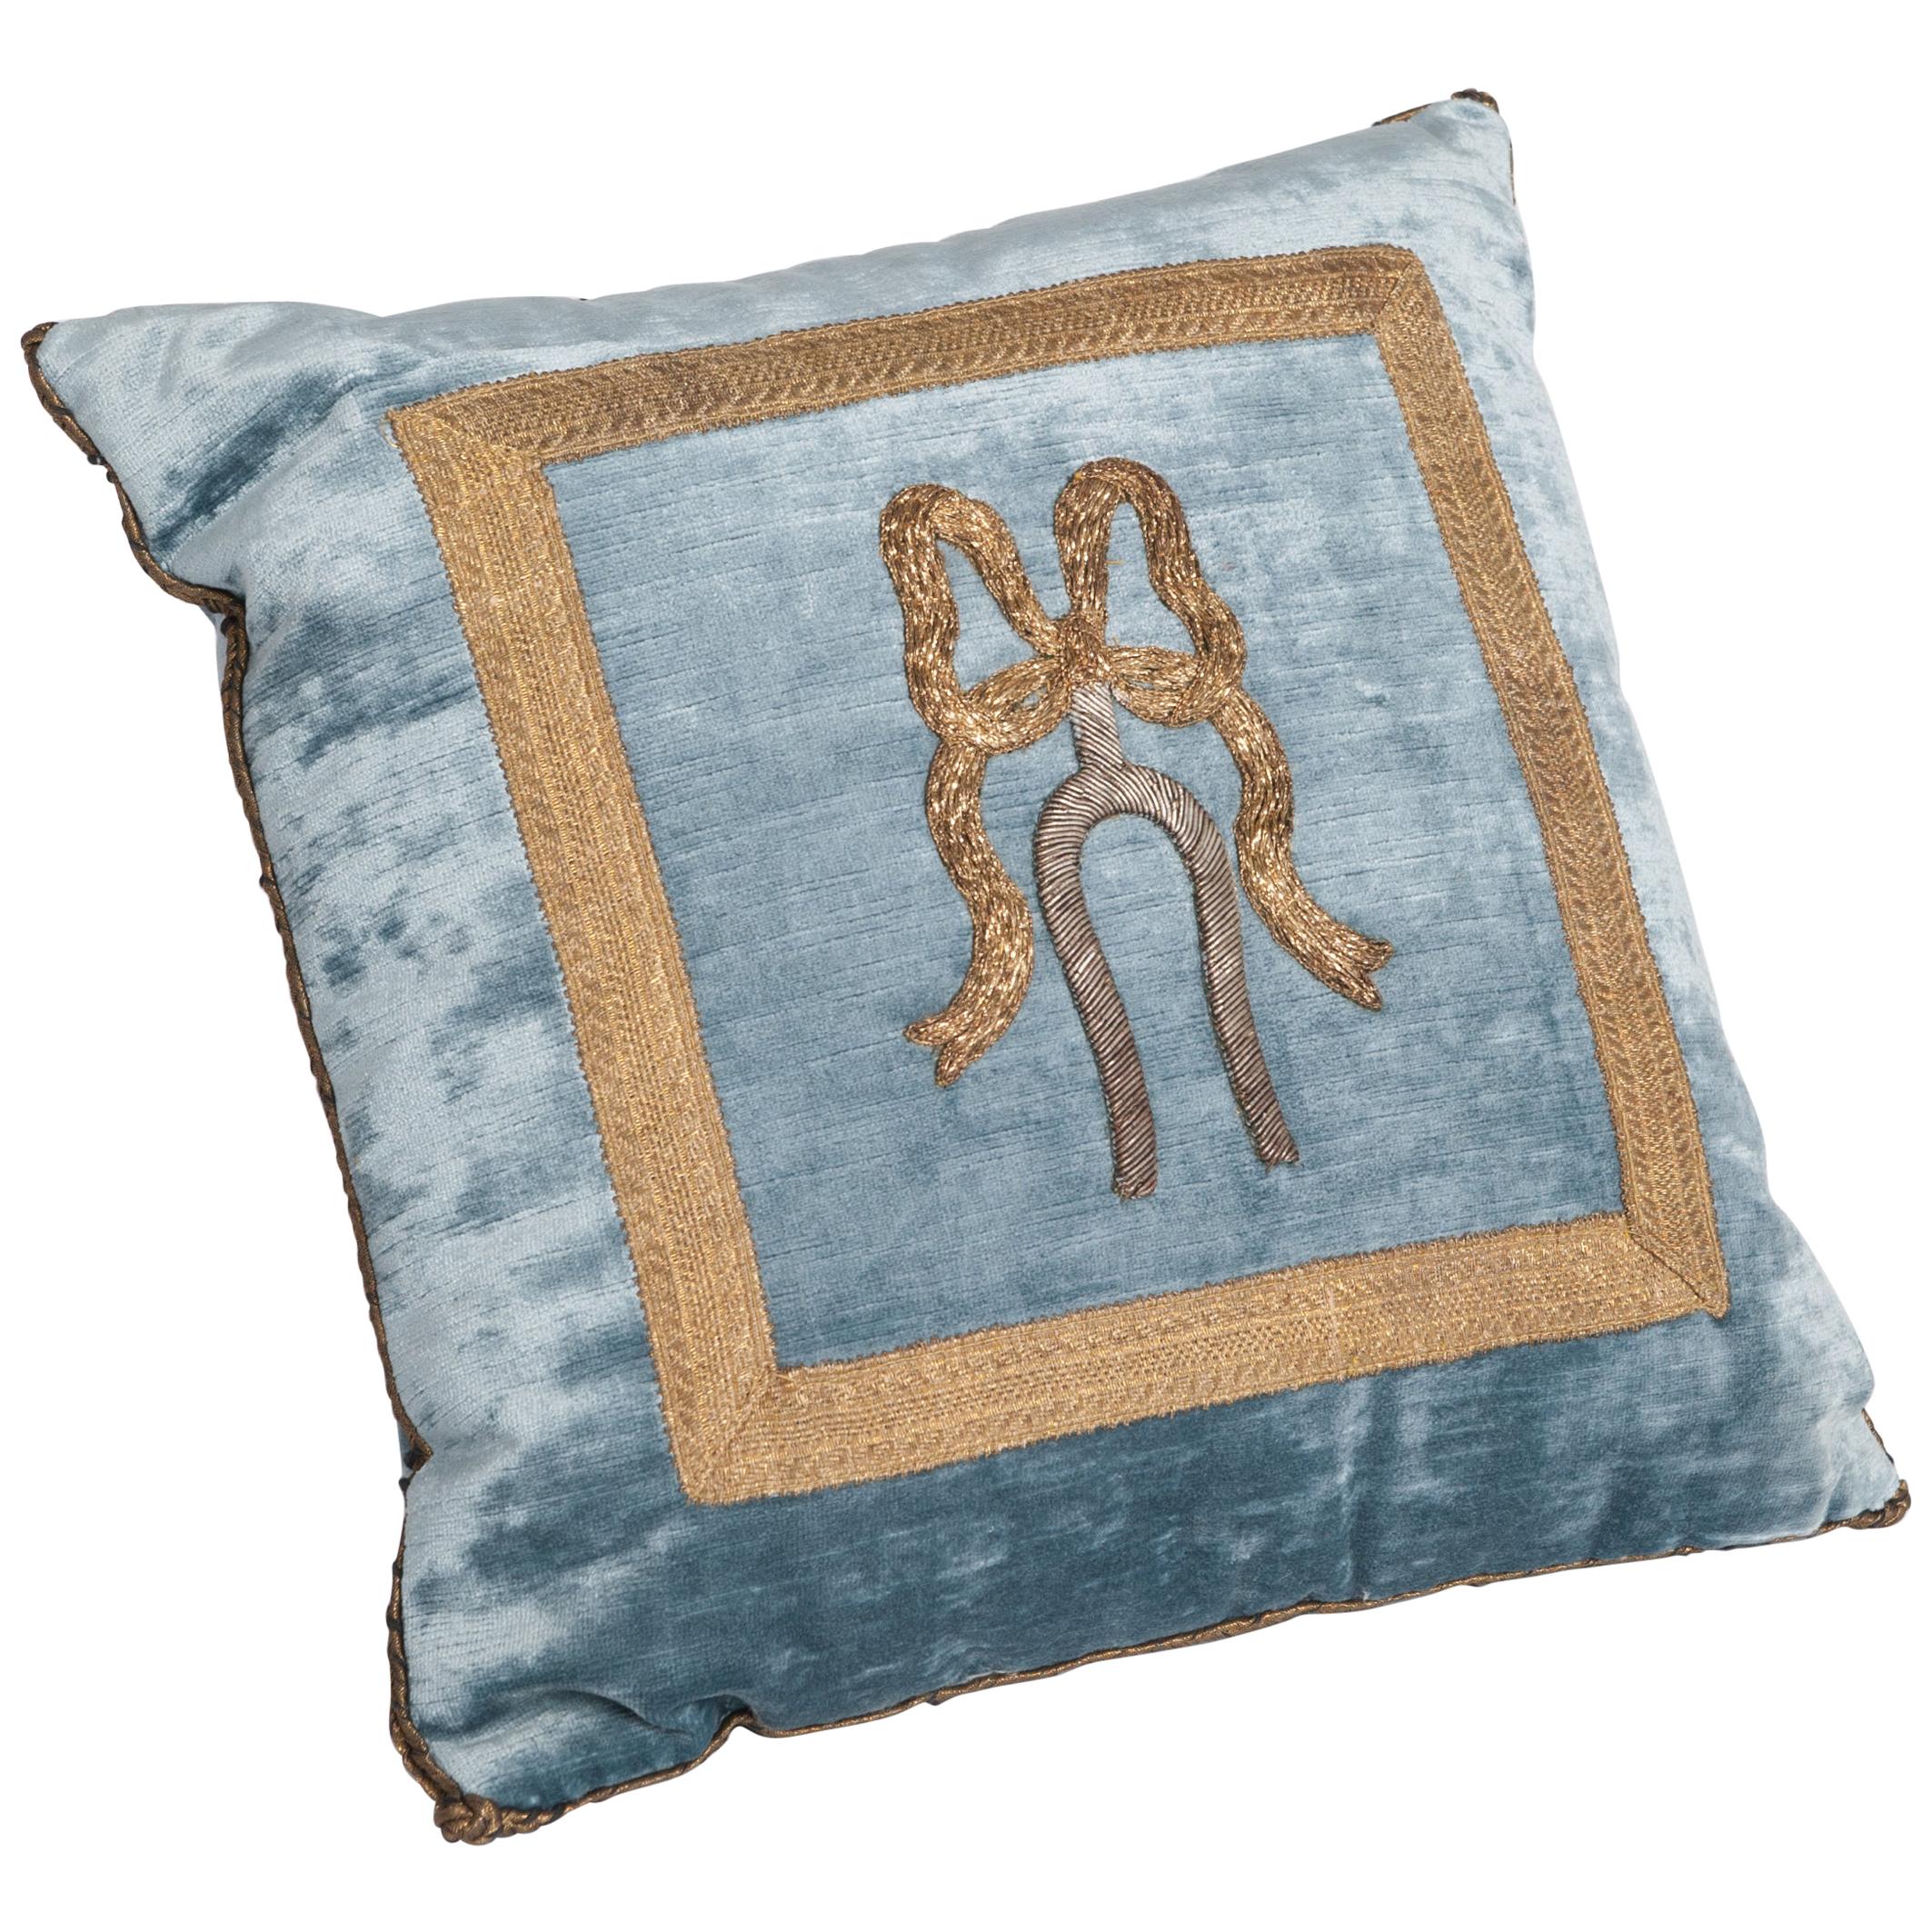 Pillow with Antique Silver and Gold Metallic Embroidery on French Blue Velvet